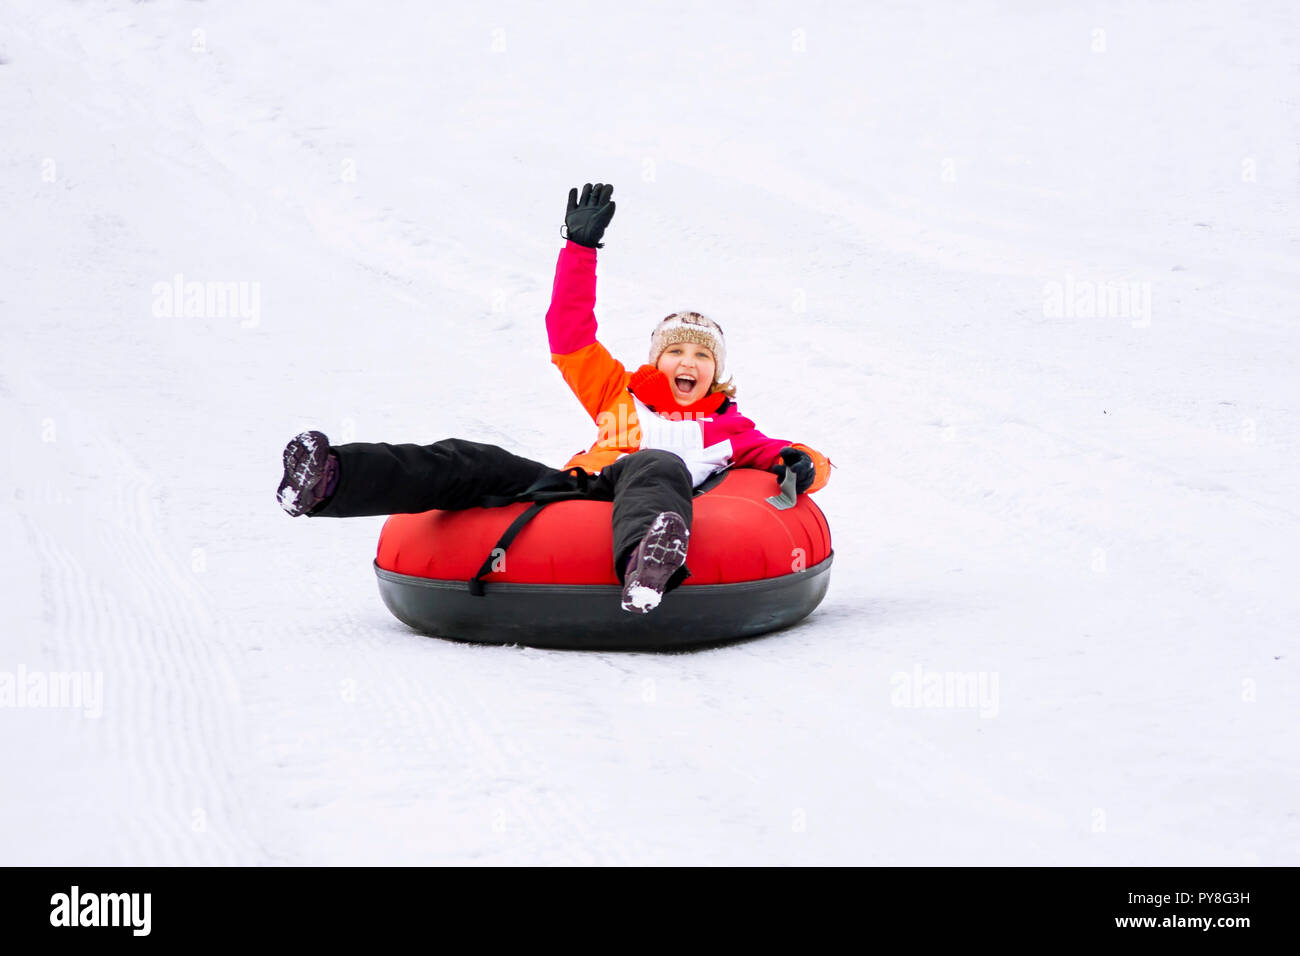 Child girl on snow tubes downhill at winter day. Stock Photo